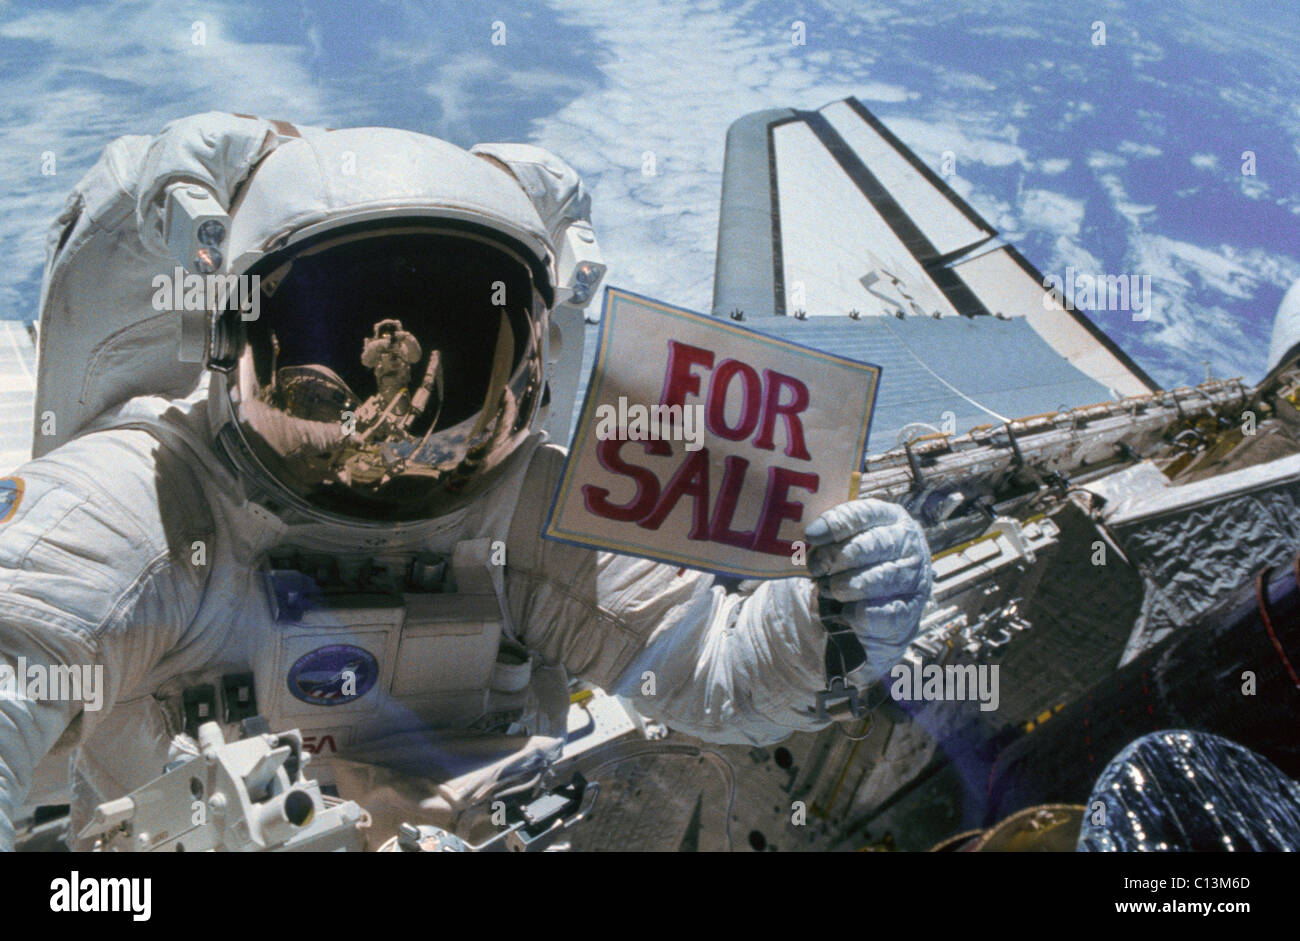 Astronaut Gardner holds a 'For Sale' sign after the orbital retrieval of two malfunctioning satellites the Western Union Telegraph Communication Satellite WESTAR VI and the PALAPA-B2 Satellite. The NASA Space shuttle program regularly contracted to launch commercial satellites. November 1984. Stock Photo